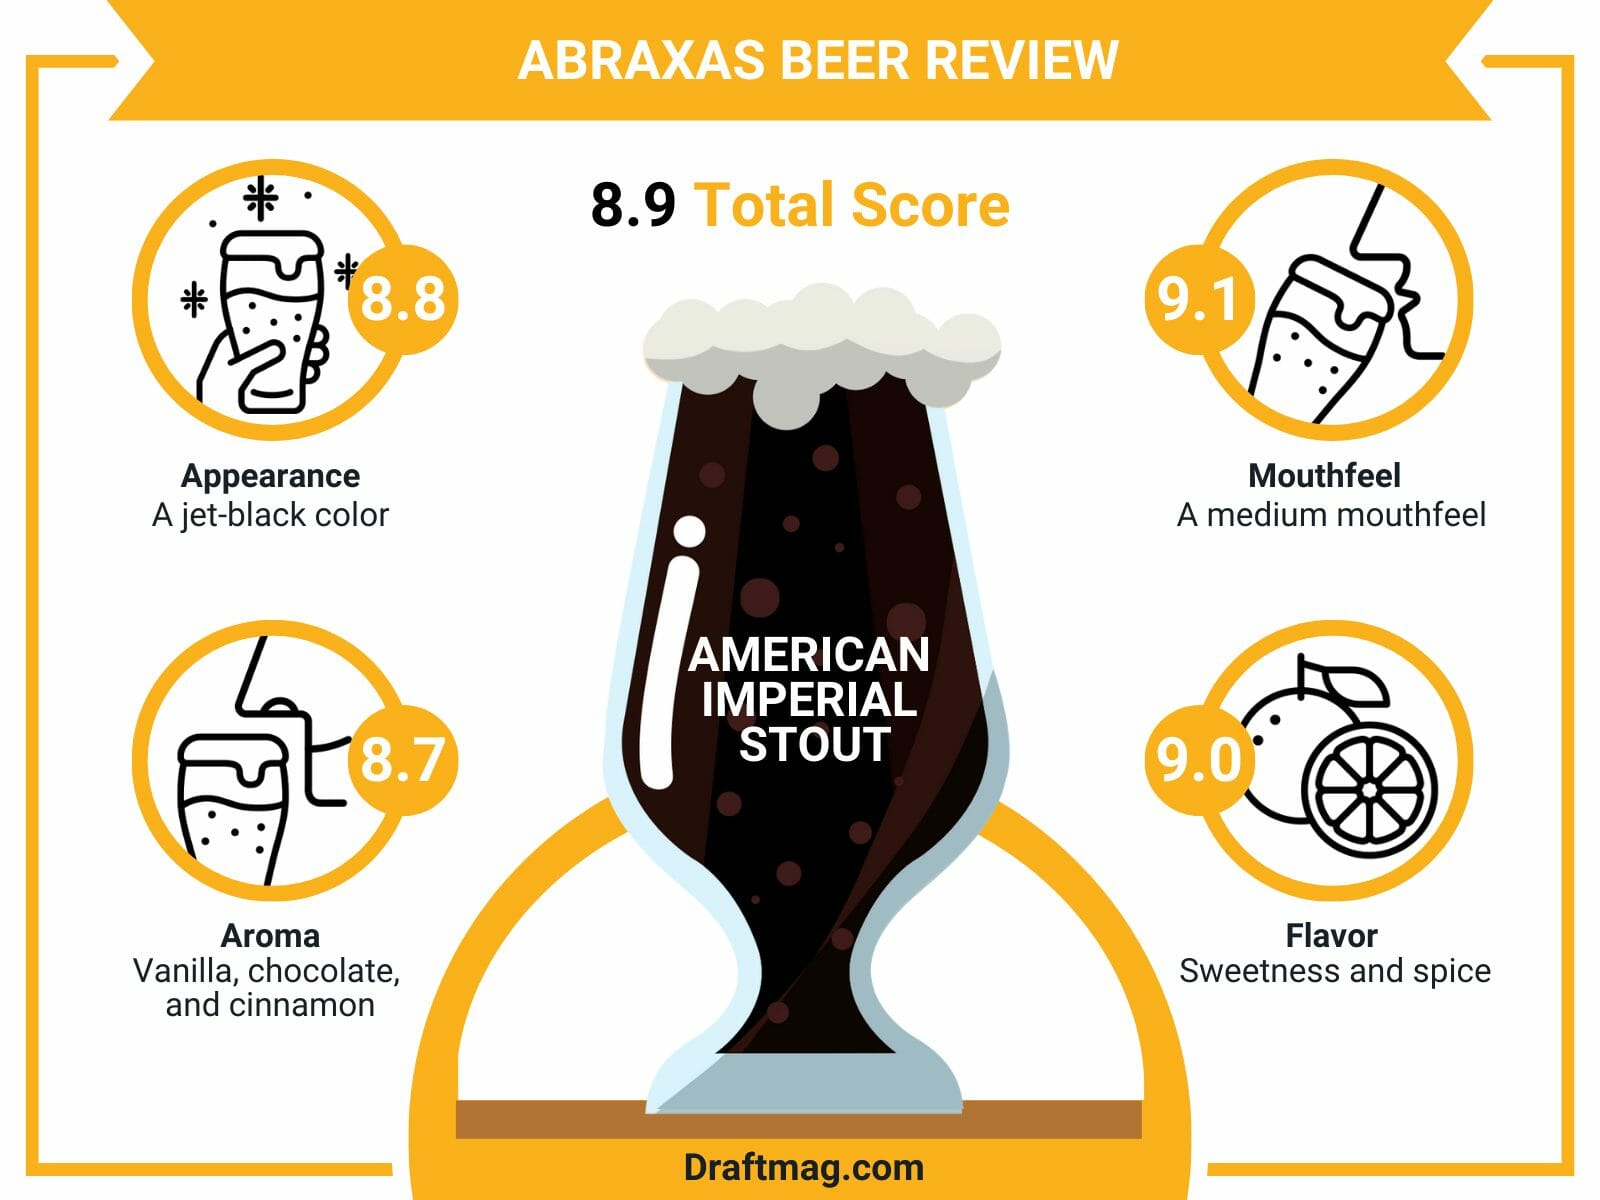 Abraxas beer review infographic